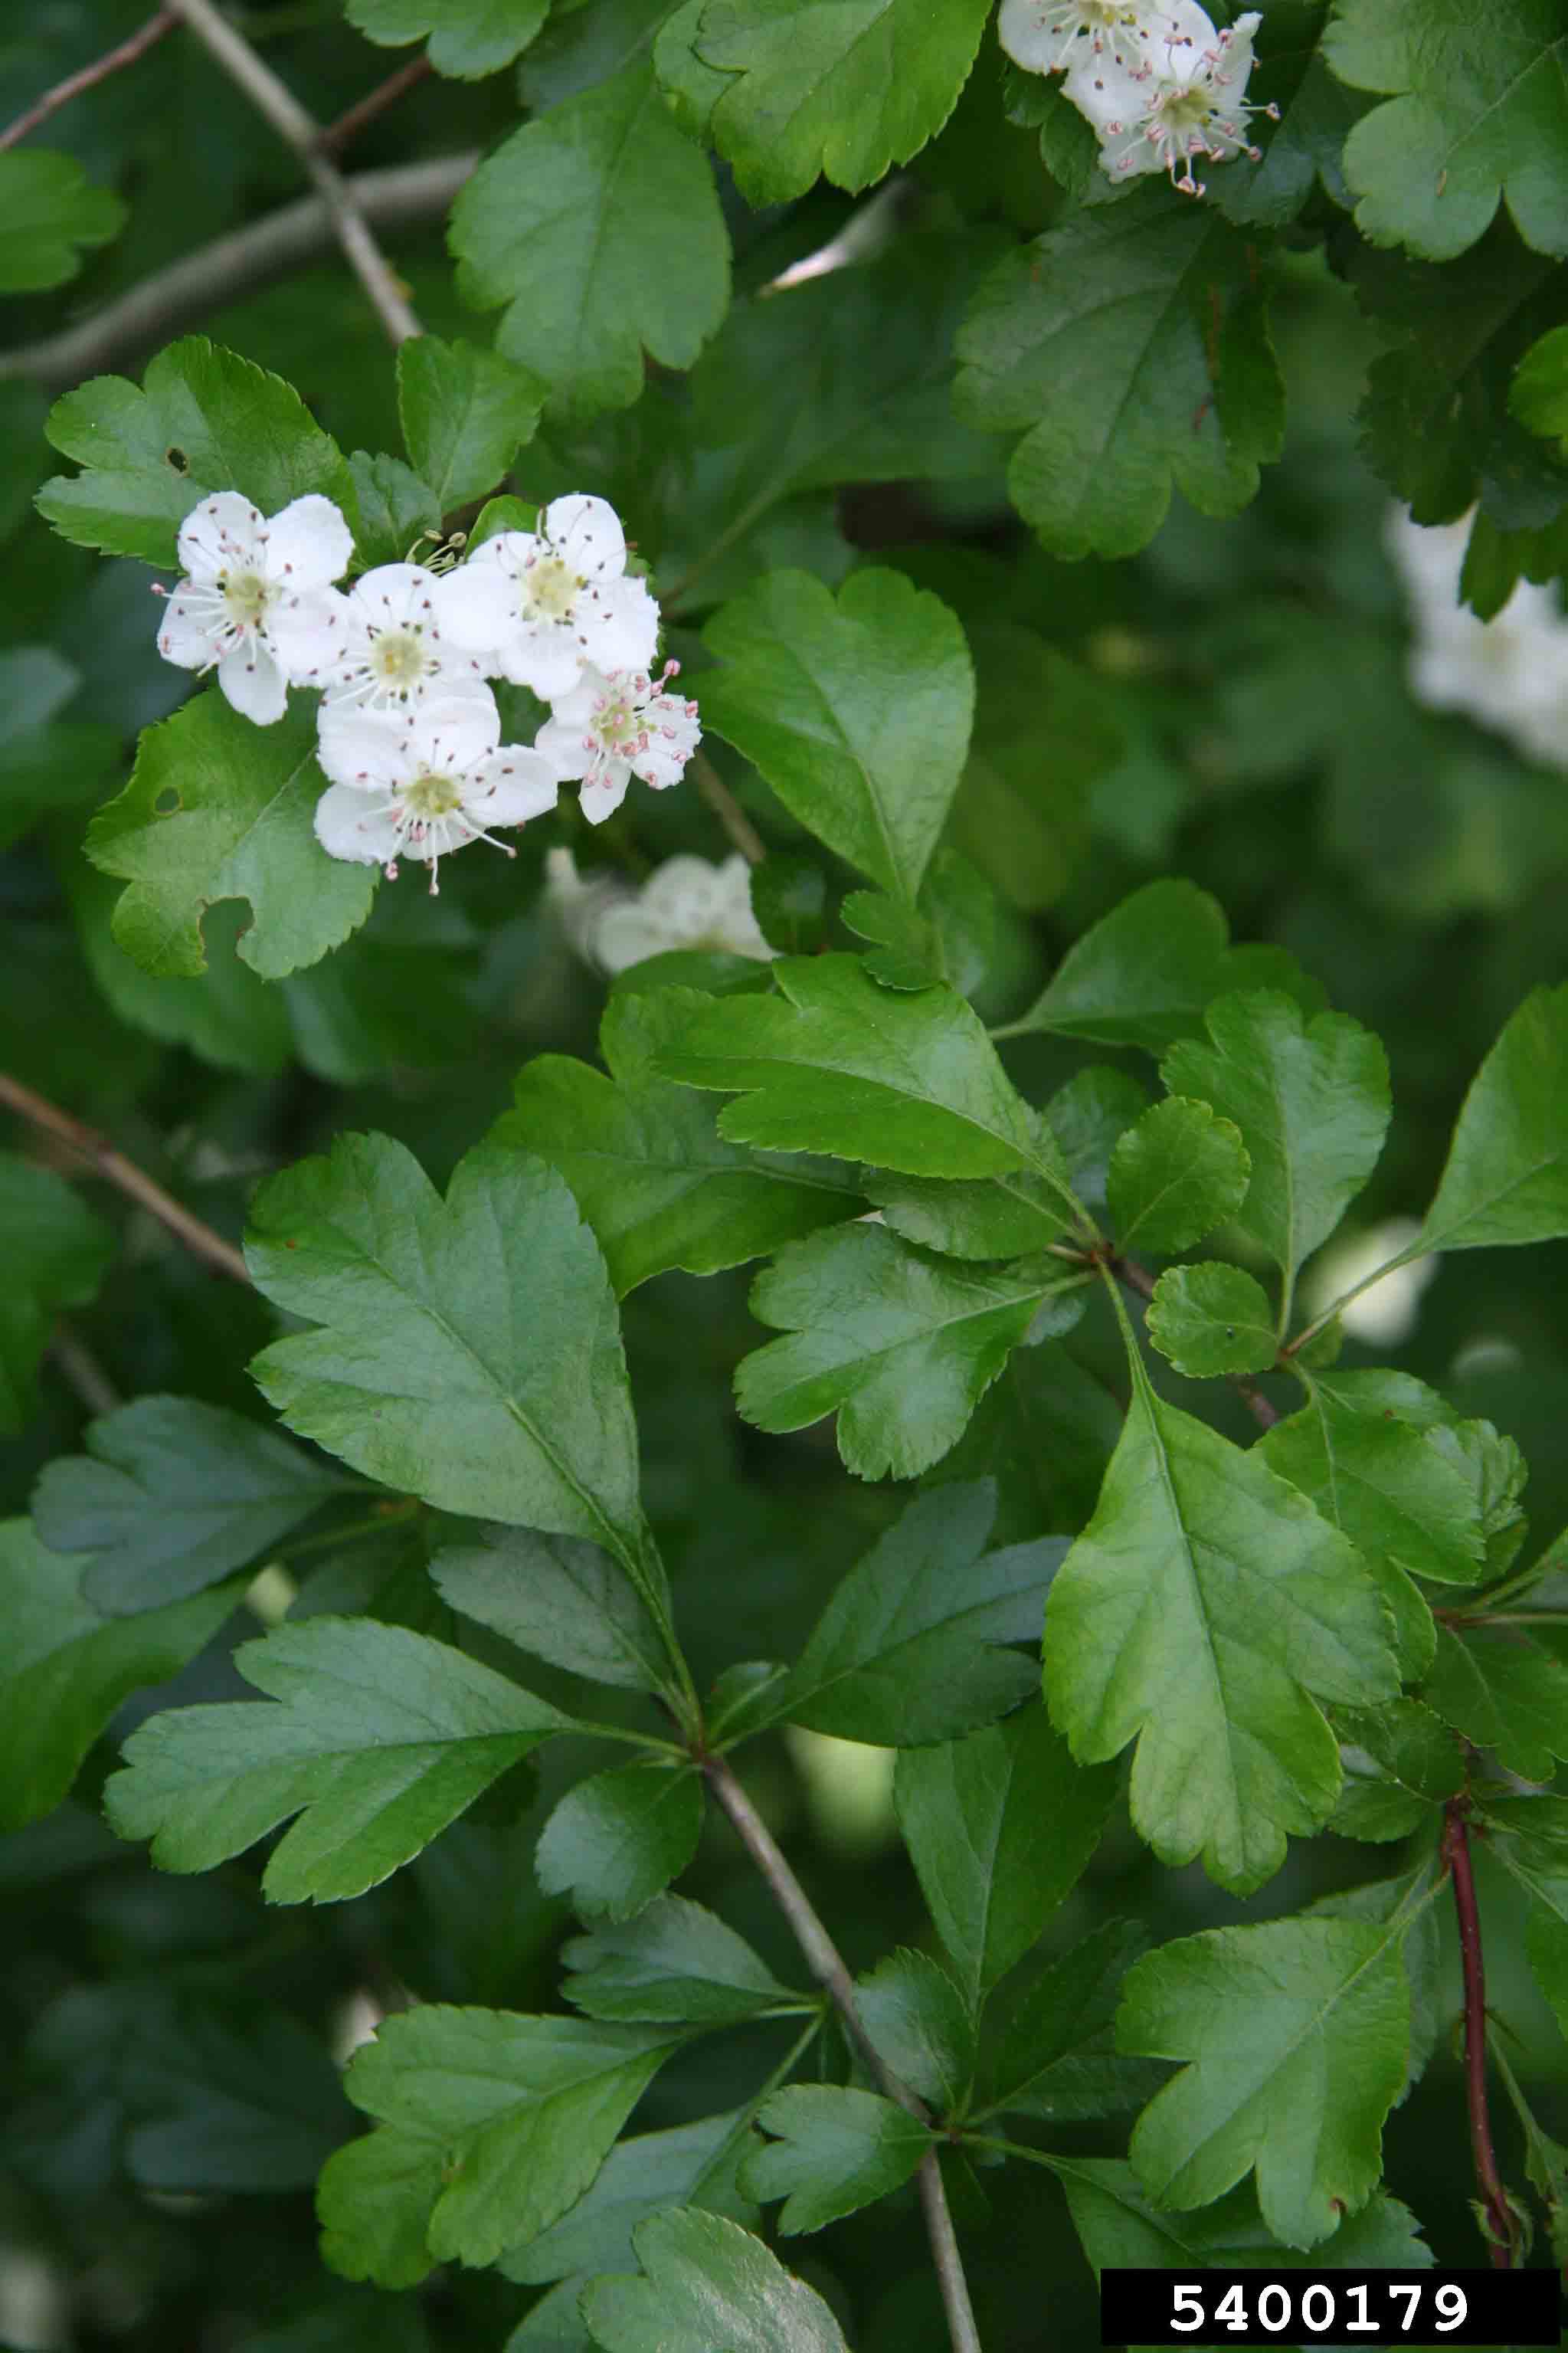 Smooth hawthorn foliage and flowers